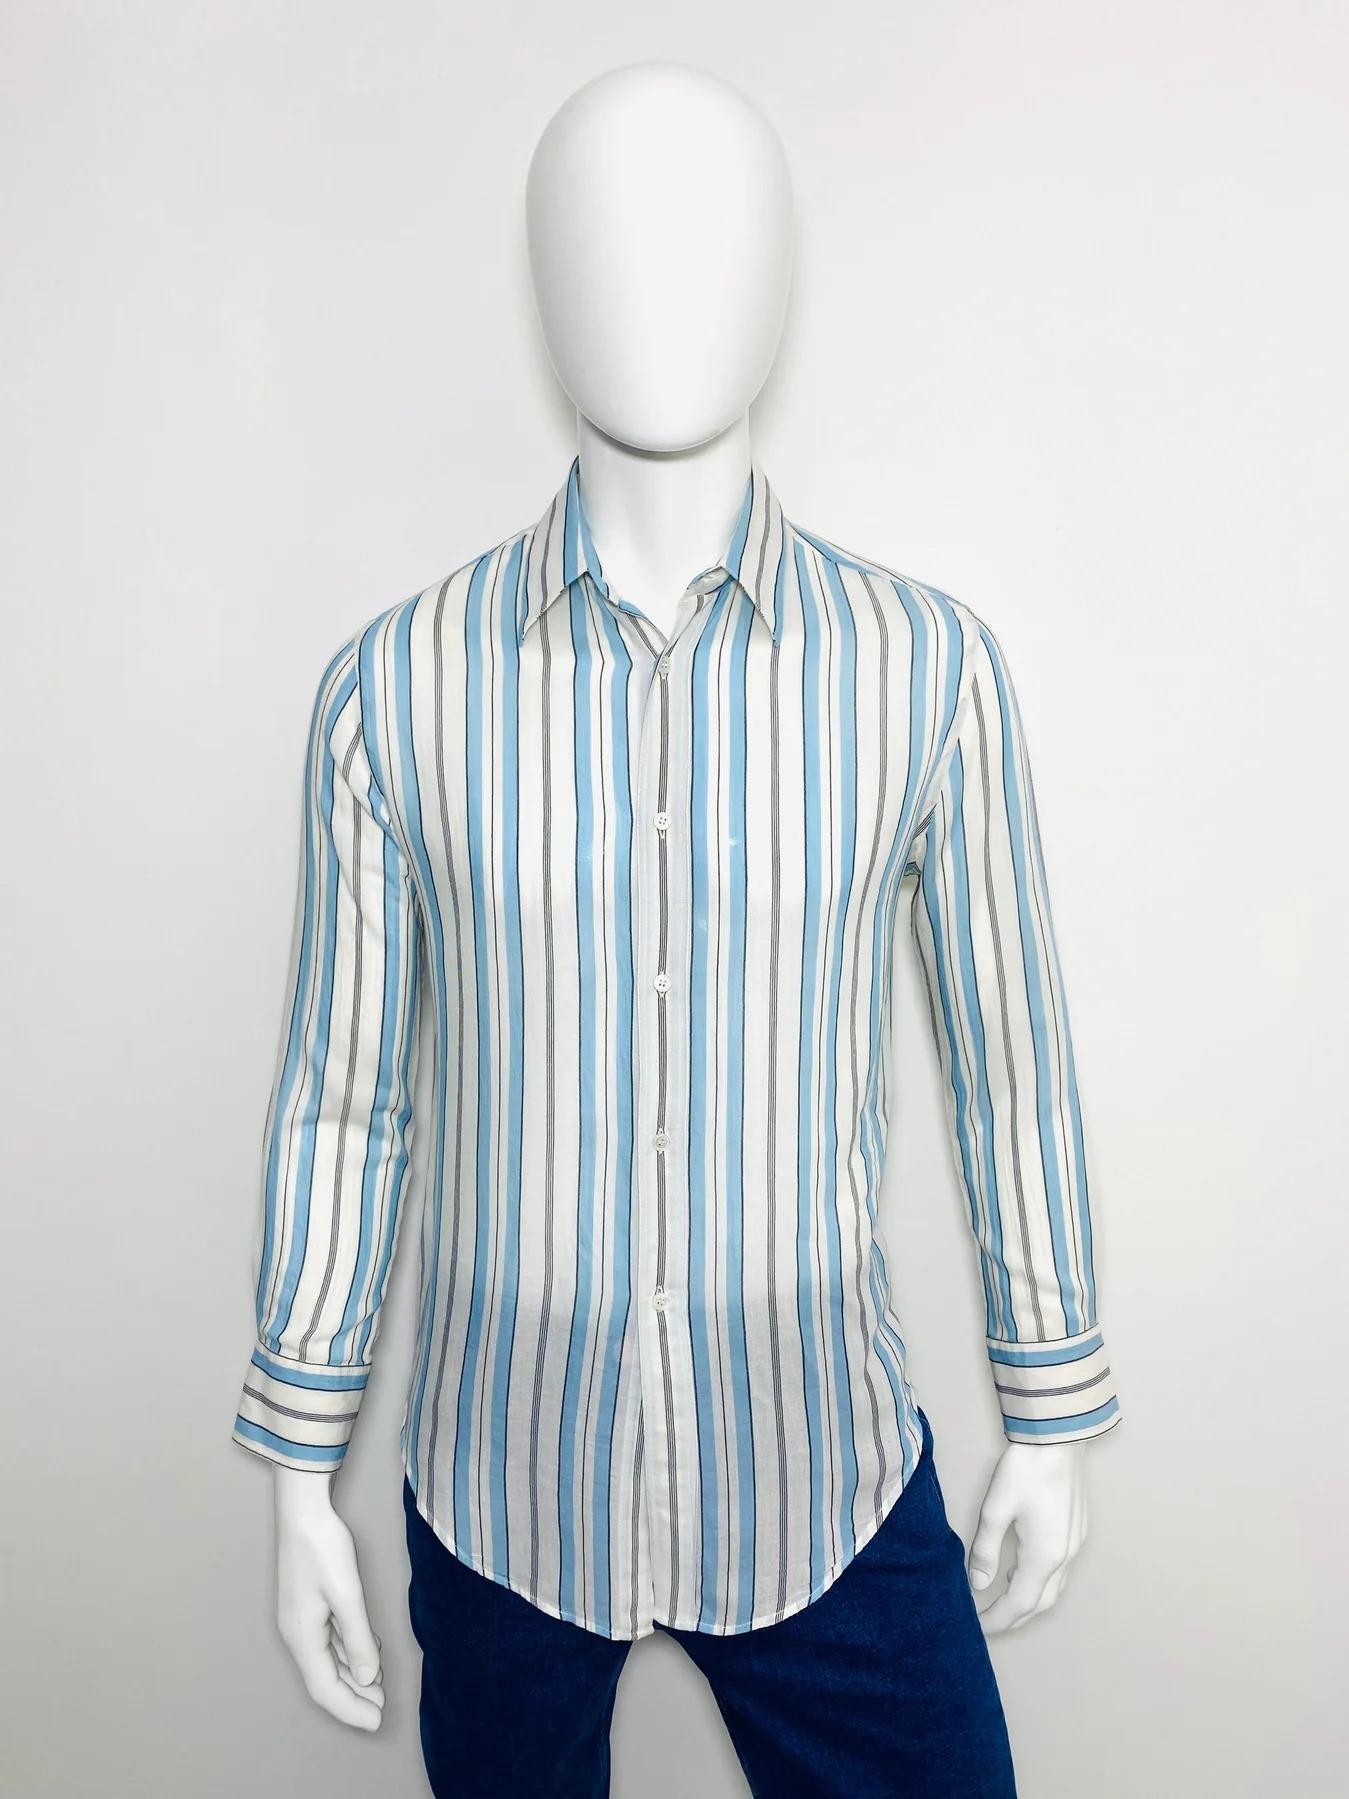 Stella Mccartney Cotton Long Sleeved Shirt

White with blue and black vertical stripes. Buttons fastening to the front.

Additional information:
Size – 40
Condition – Very Good